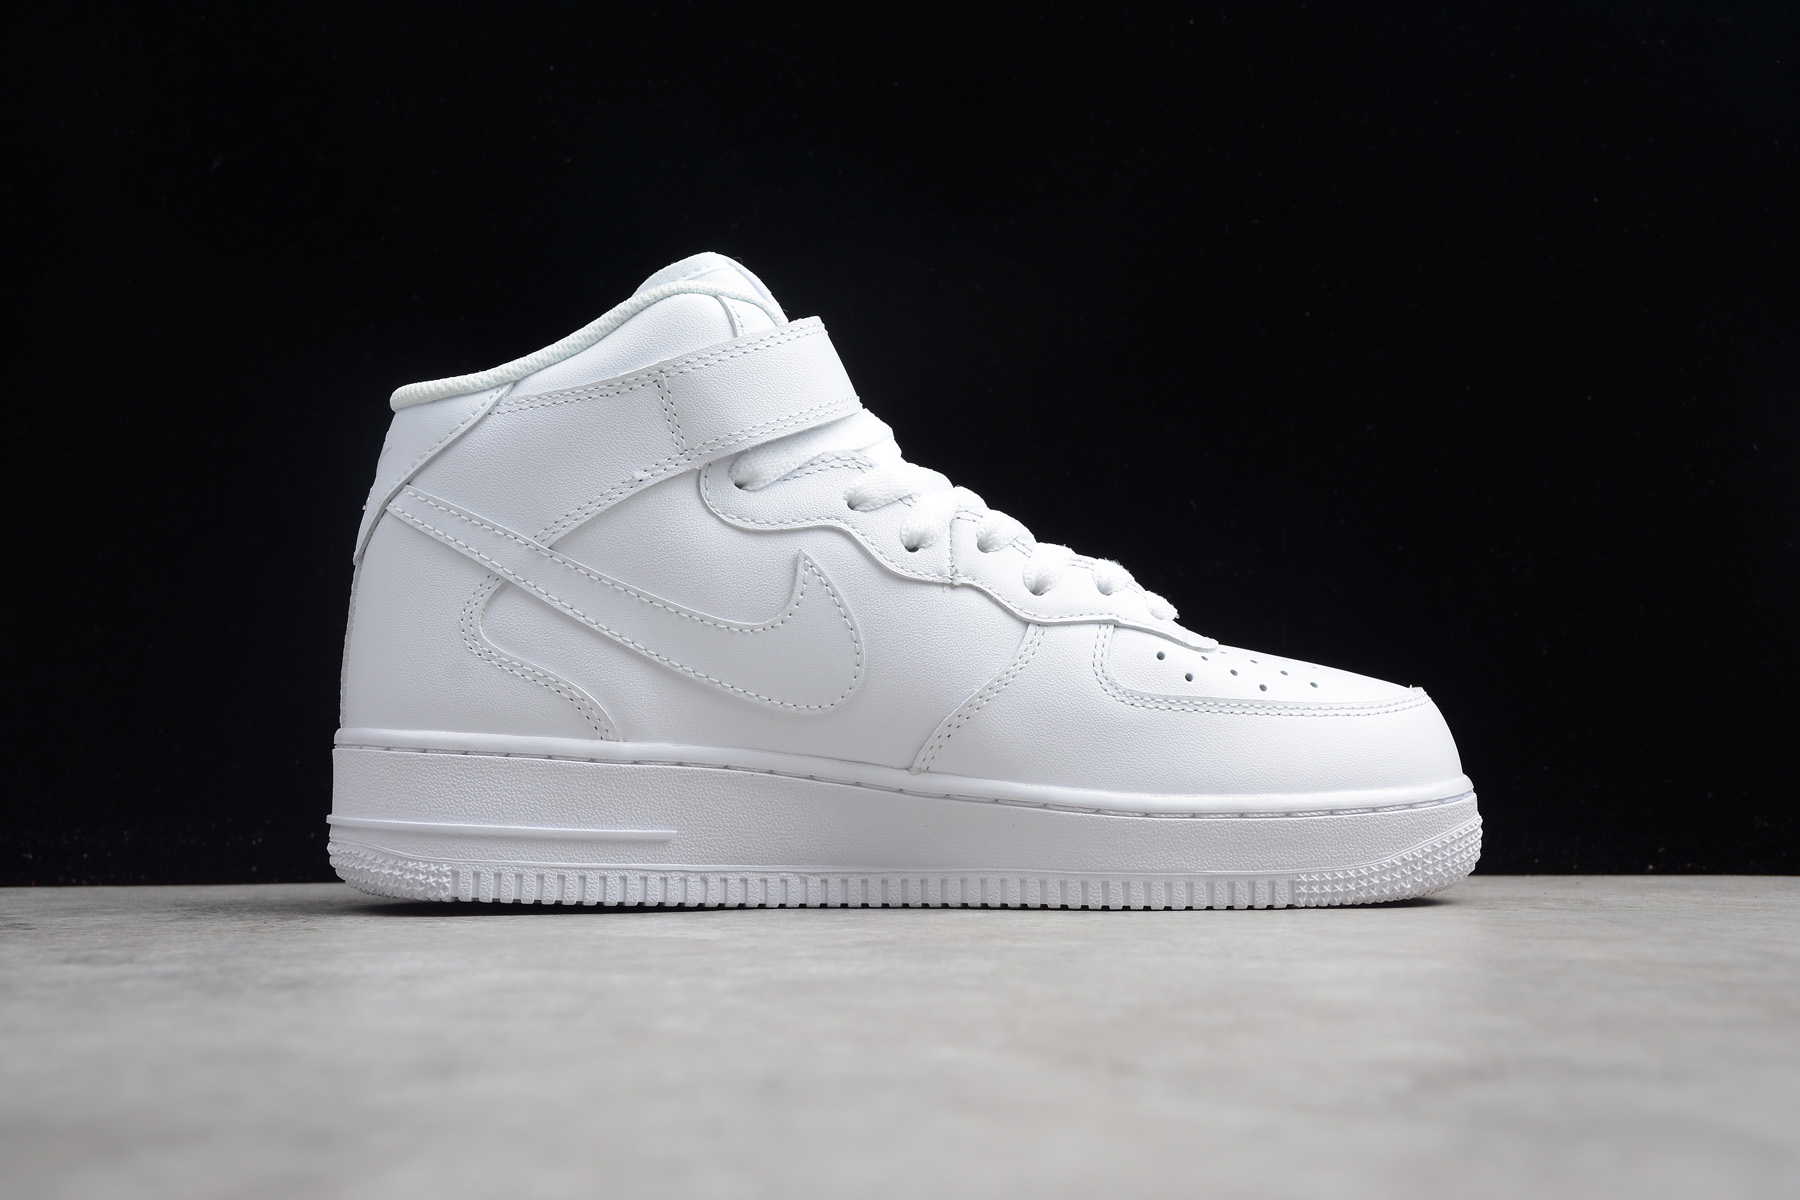 Nike Air Force 1 Mid '07 